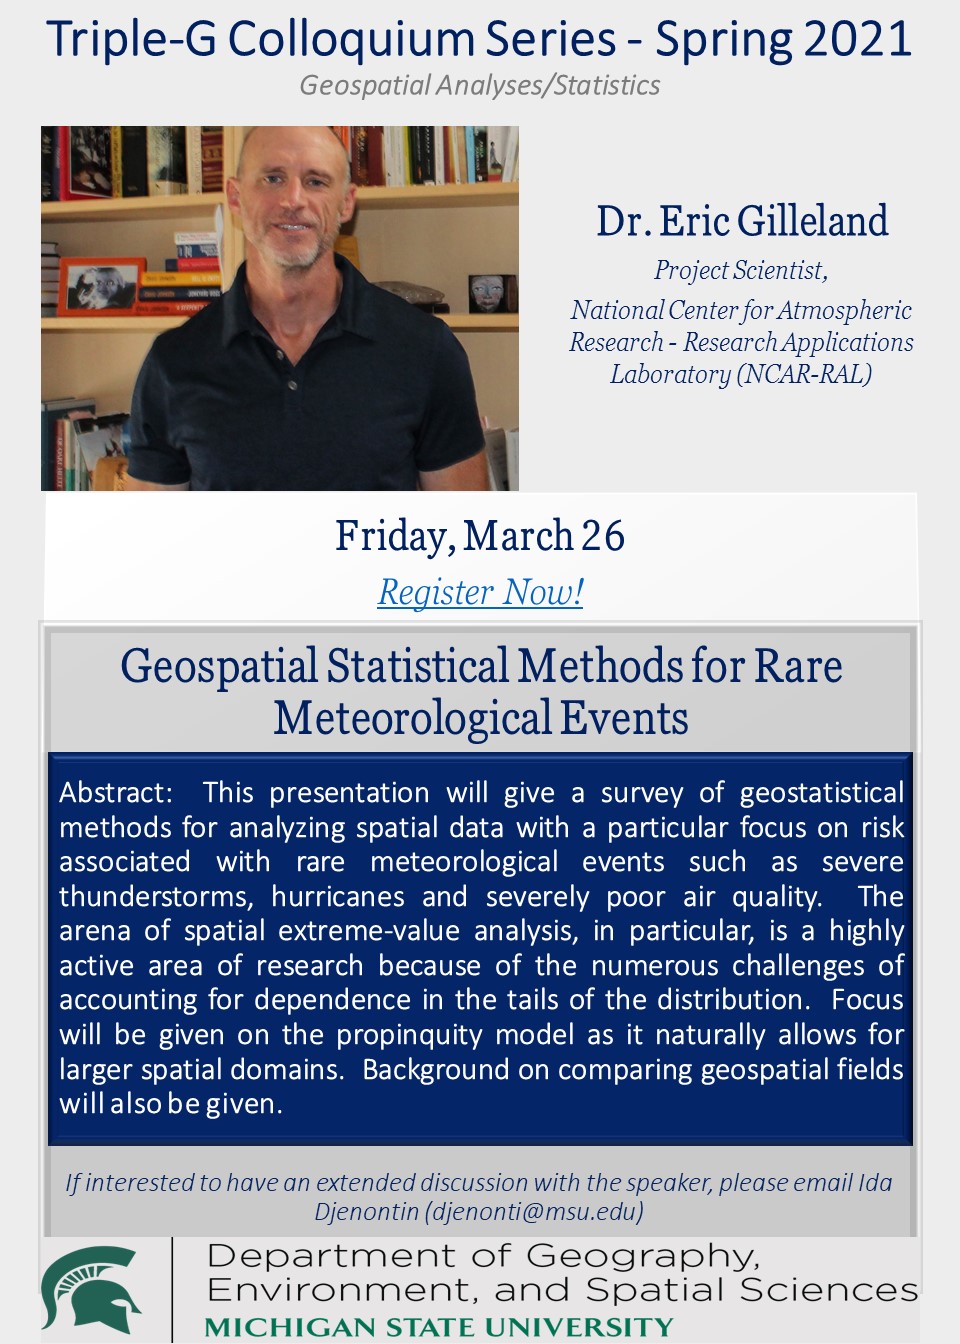 Spring Colloquium Session Flyer with Dr. Eric Gilleland